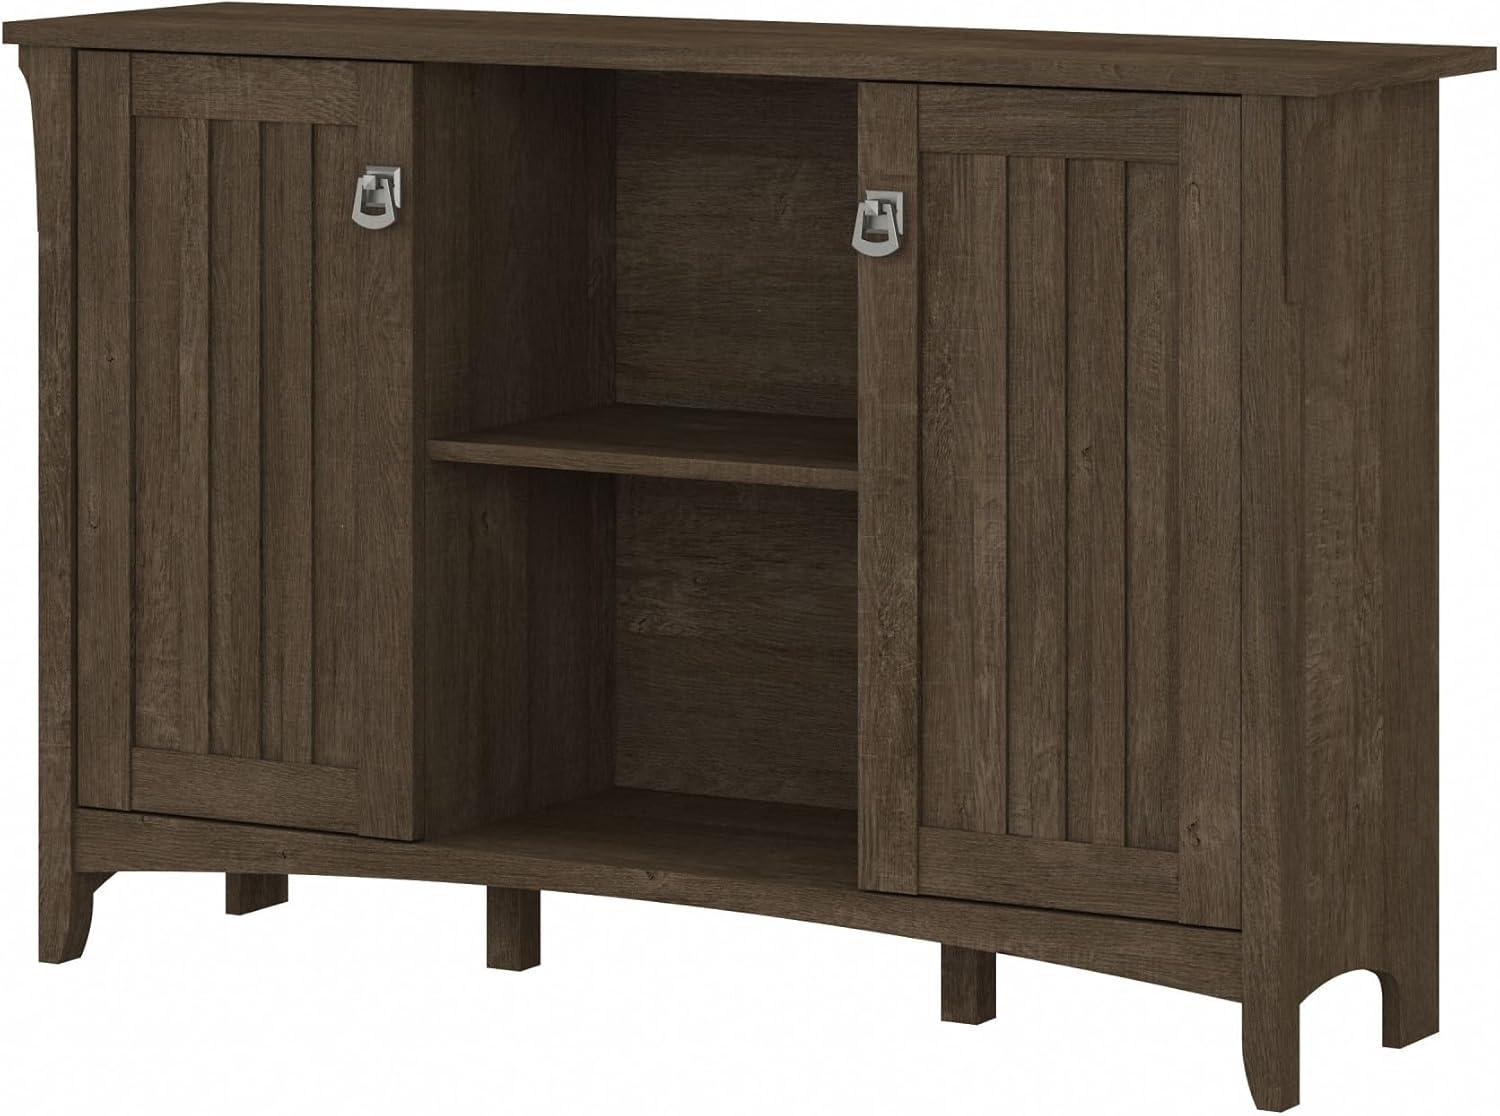 Ash Brown Freestanding Office Storage Cabinet with Adjustable Shelves